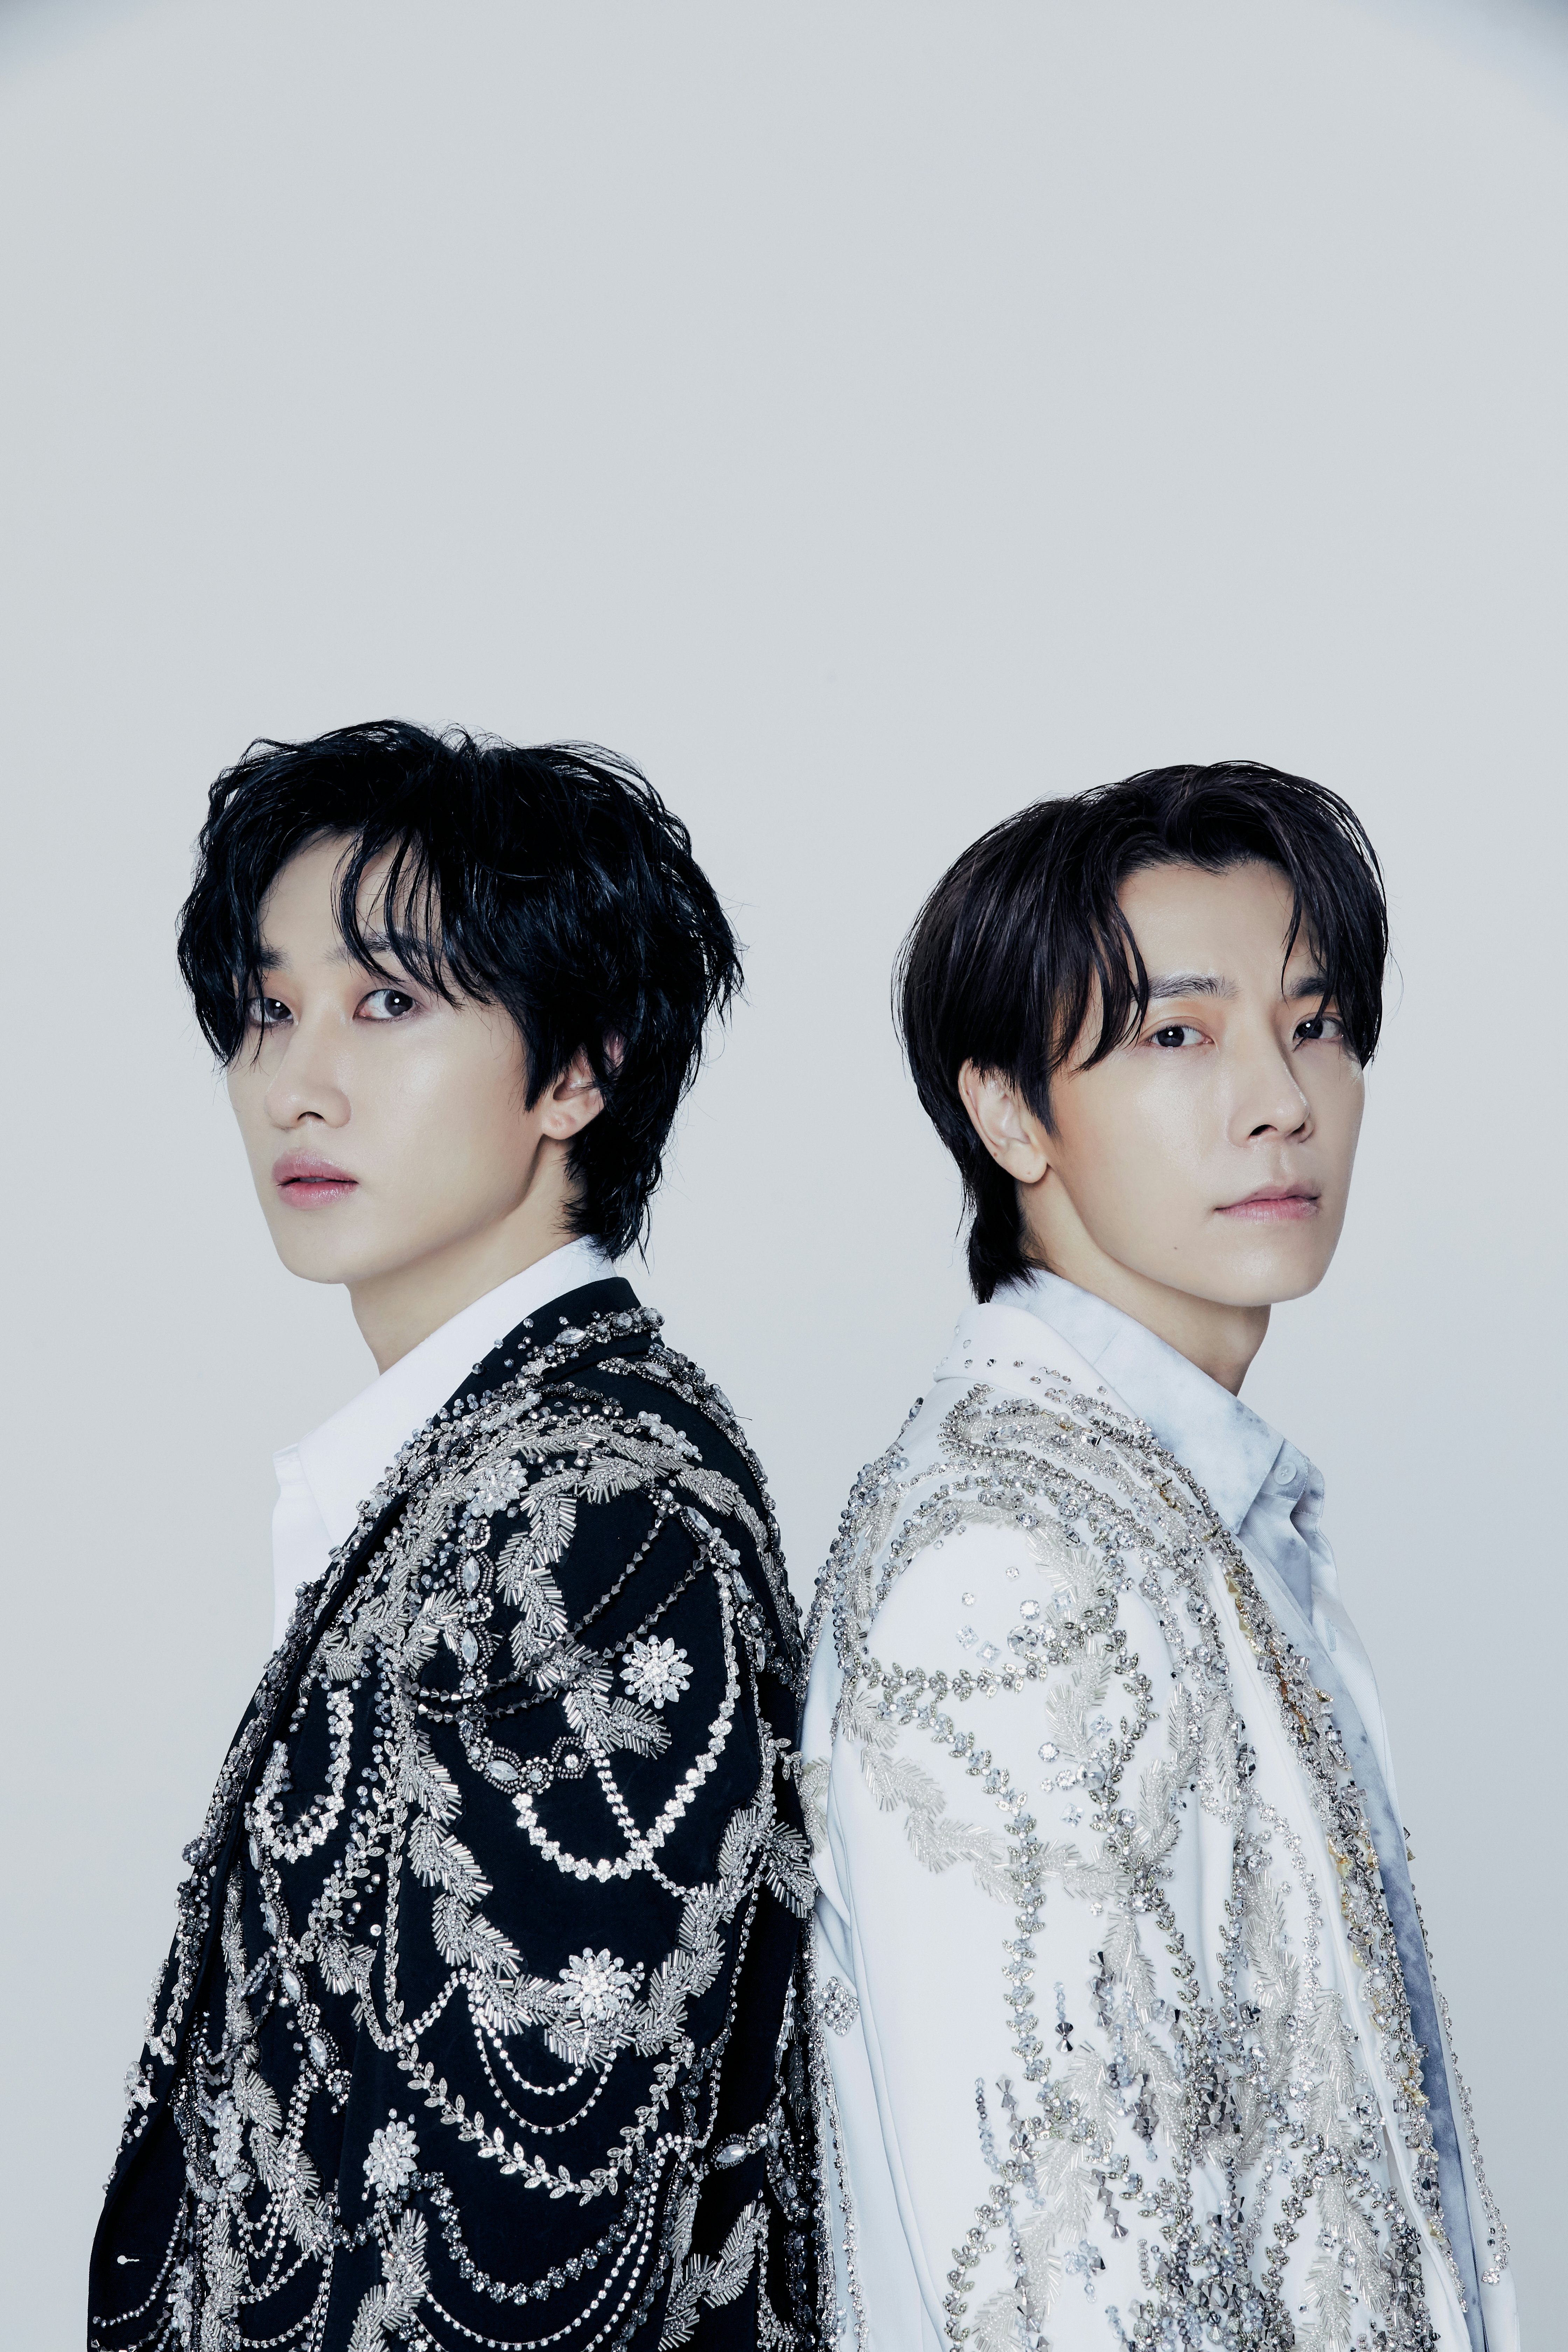 Watch: Super Junior's Donghae Collaborates With NCT's Jeno For